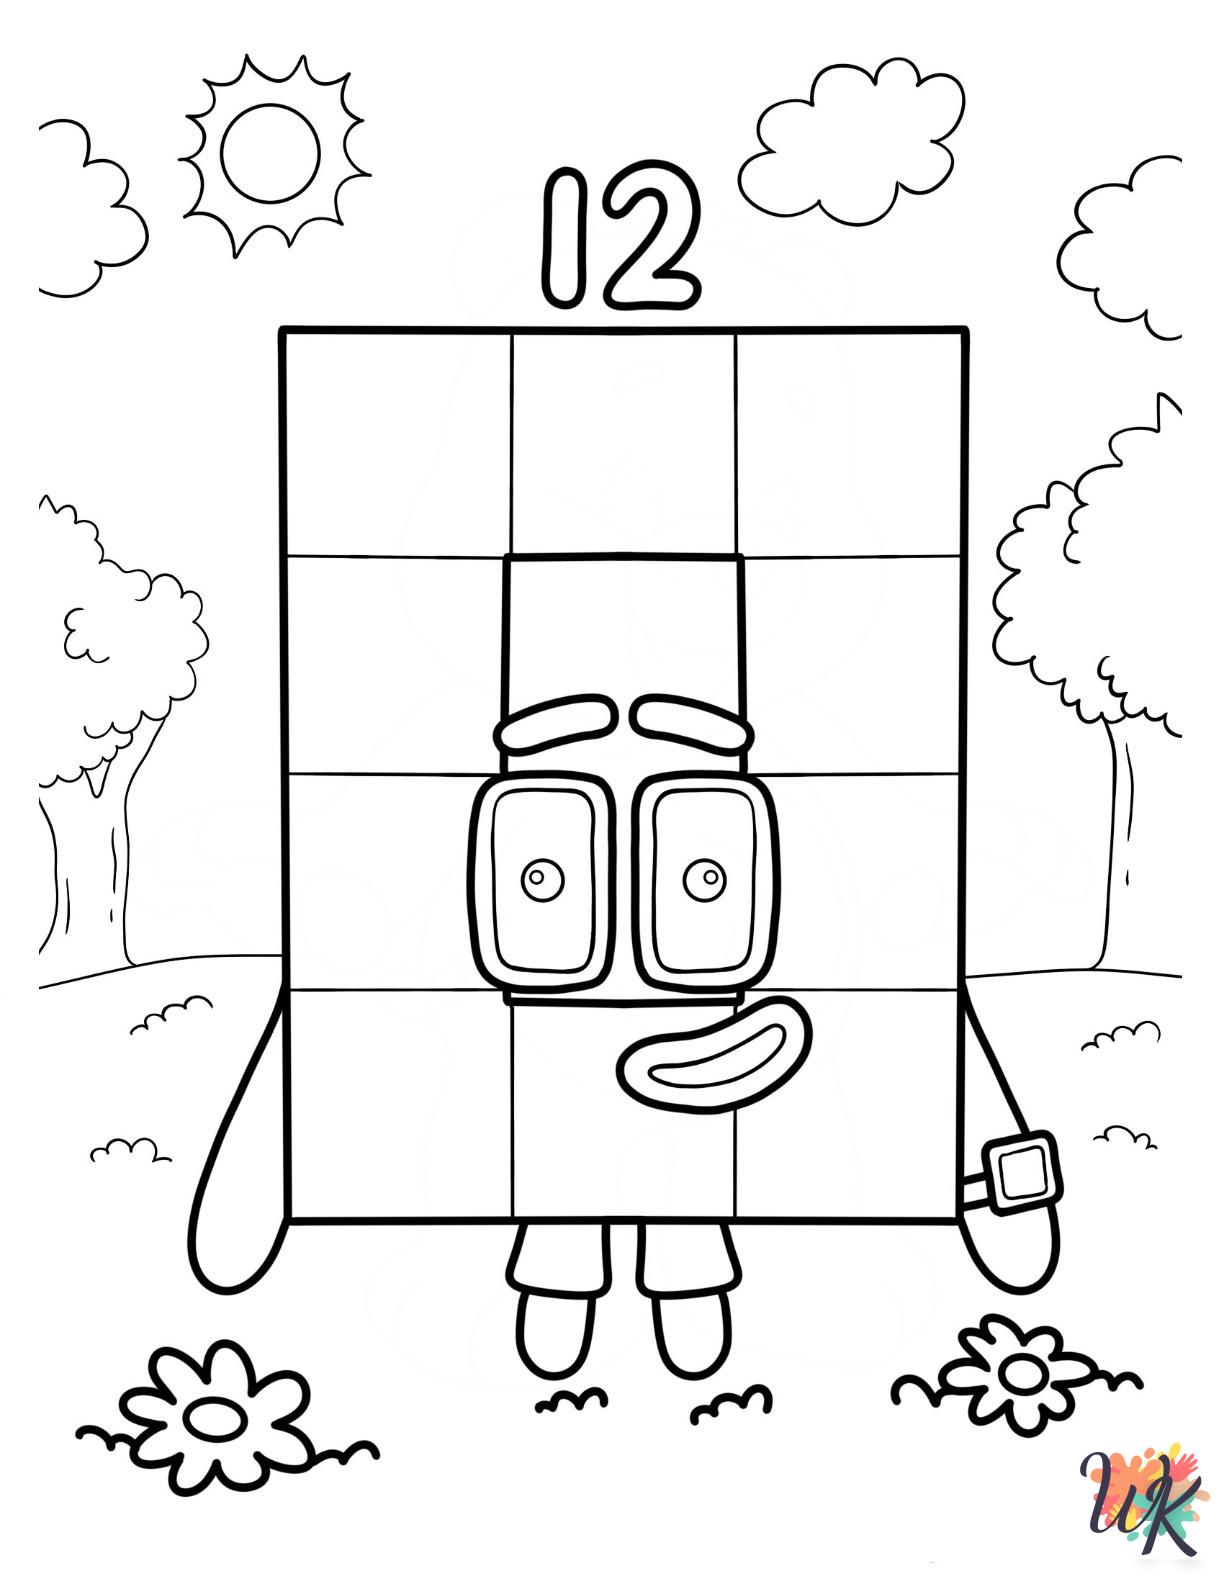 free Numberblocks coloring pages for adults